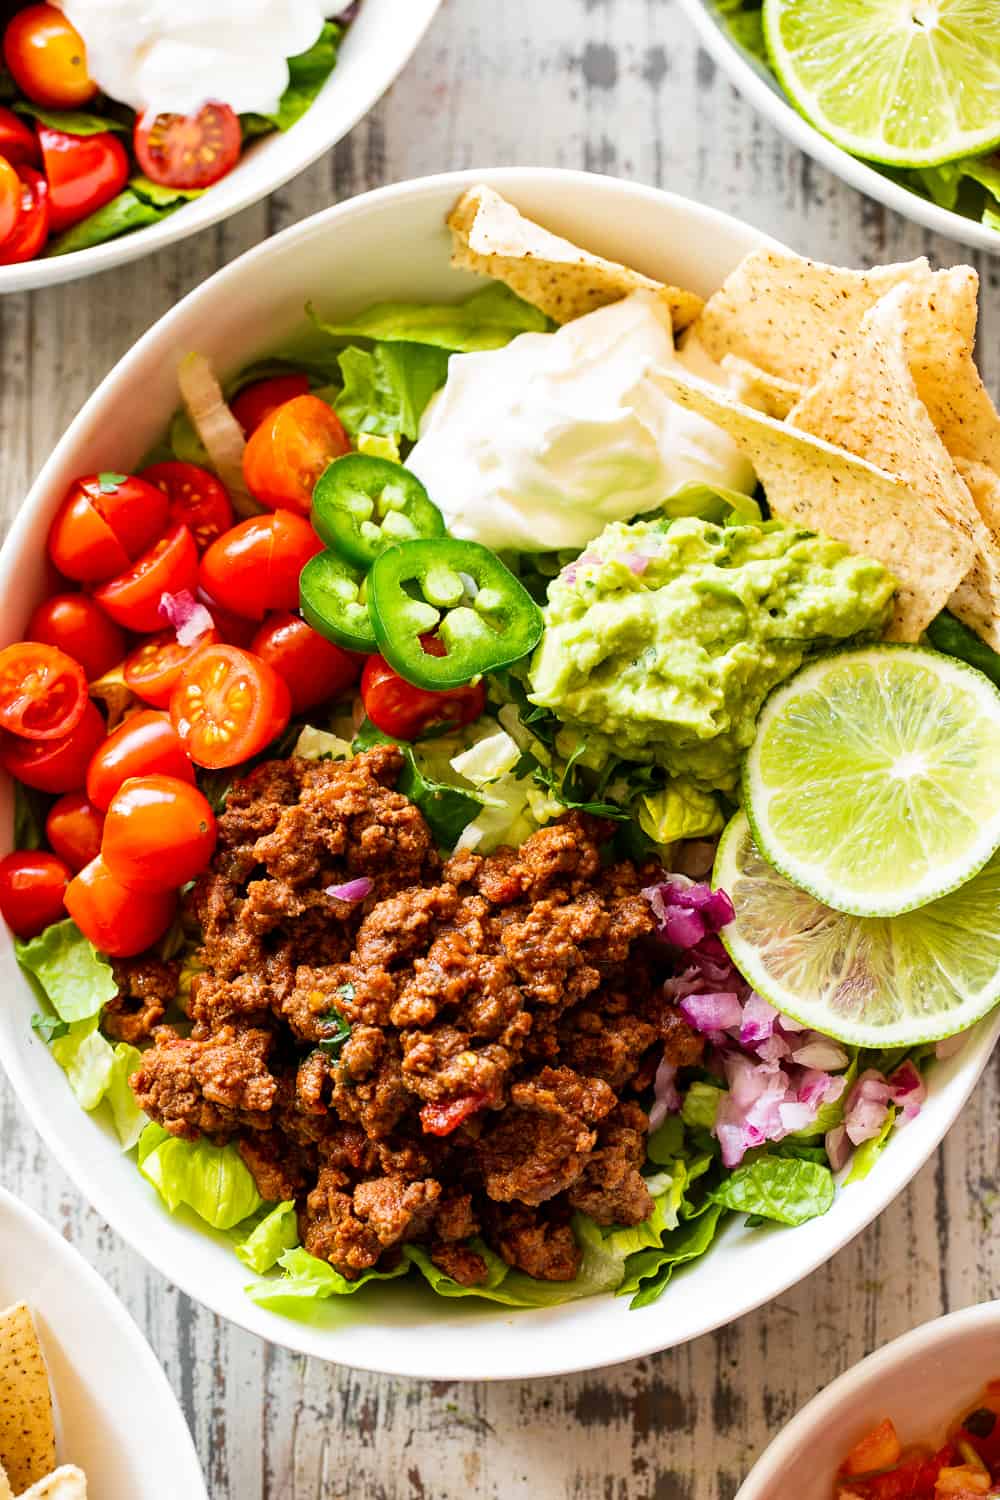 This easy, flavor packed paleo taco salad is ready in 20 minutes from start to finish and great for an easy weeknight dinner! Whole30 and keto options. #paleo #whole30 #keto #cleaneating 